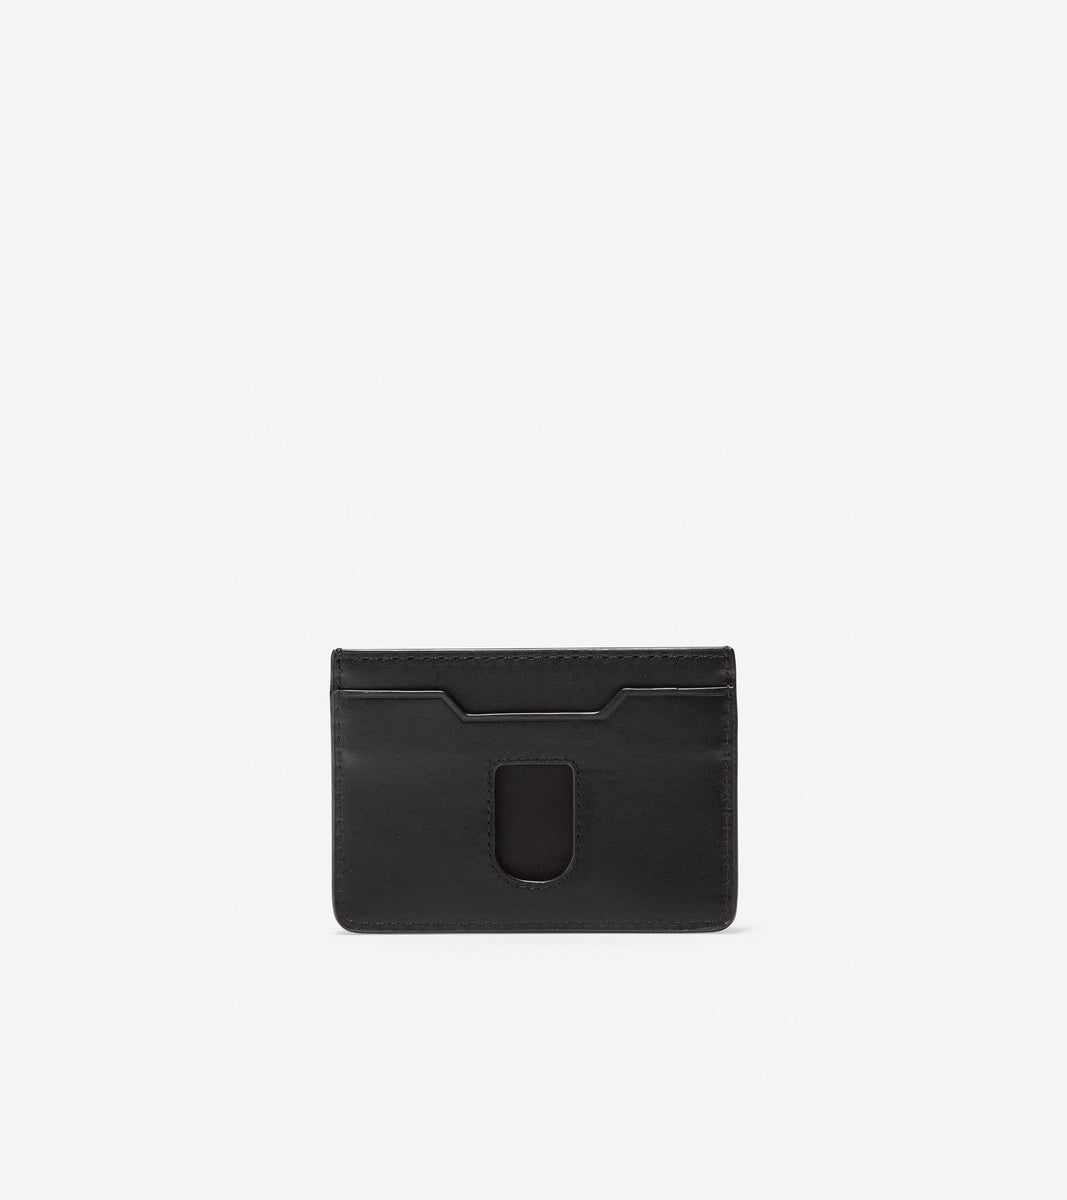 ColeHaan-GRANDSERIES Leather Card Case-f11436-Black